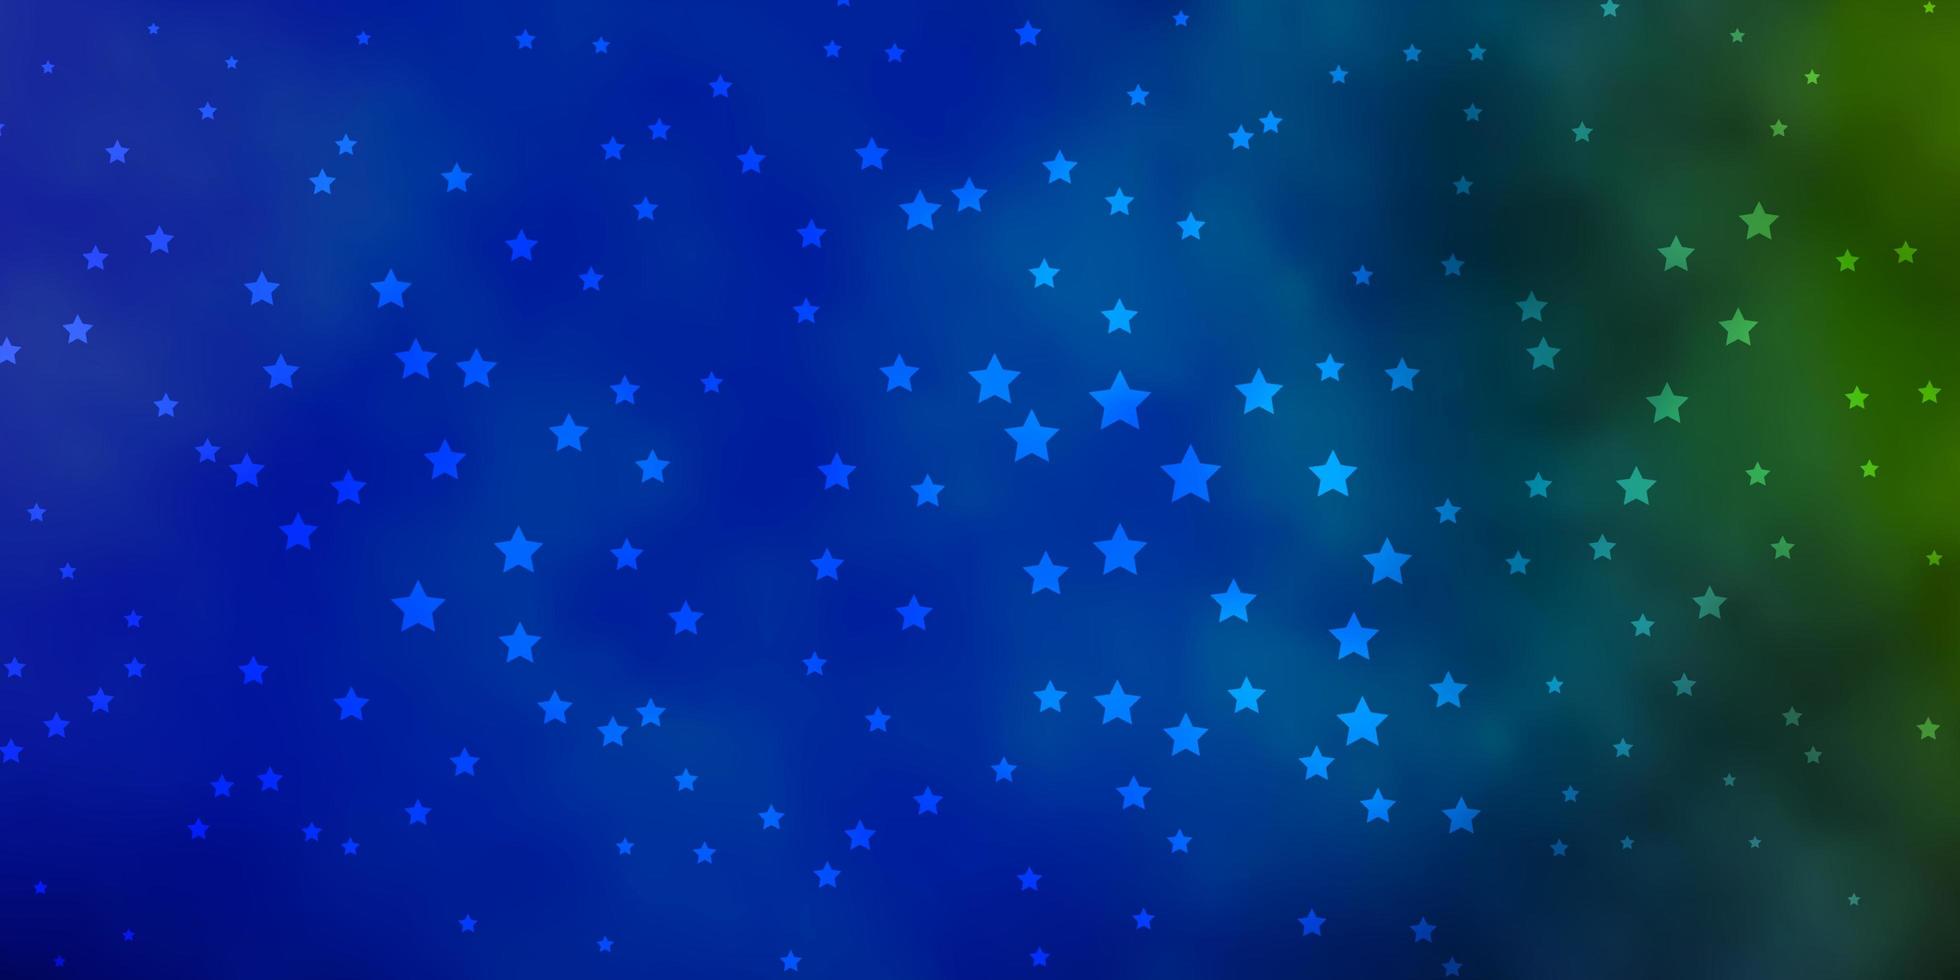 Dark Blue, Green vector template with neon stars. Shining colorful illustration with small and big stars. Design for your business promotion.